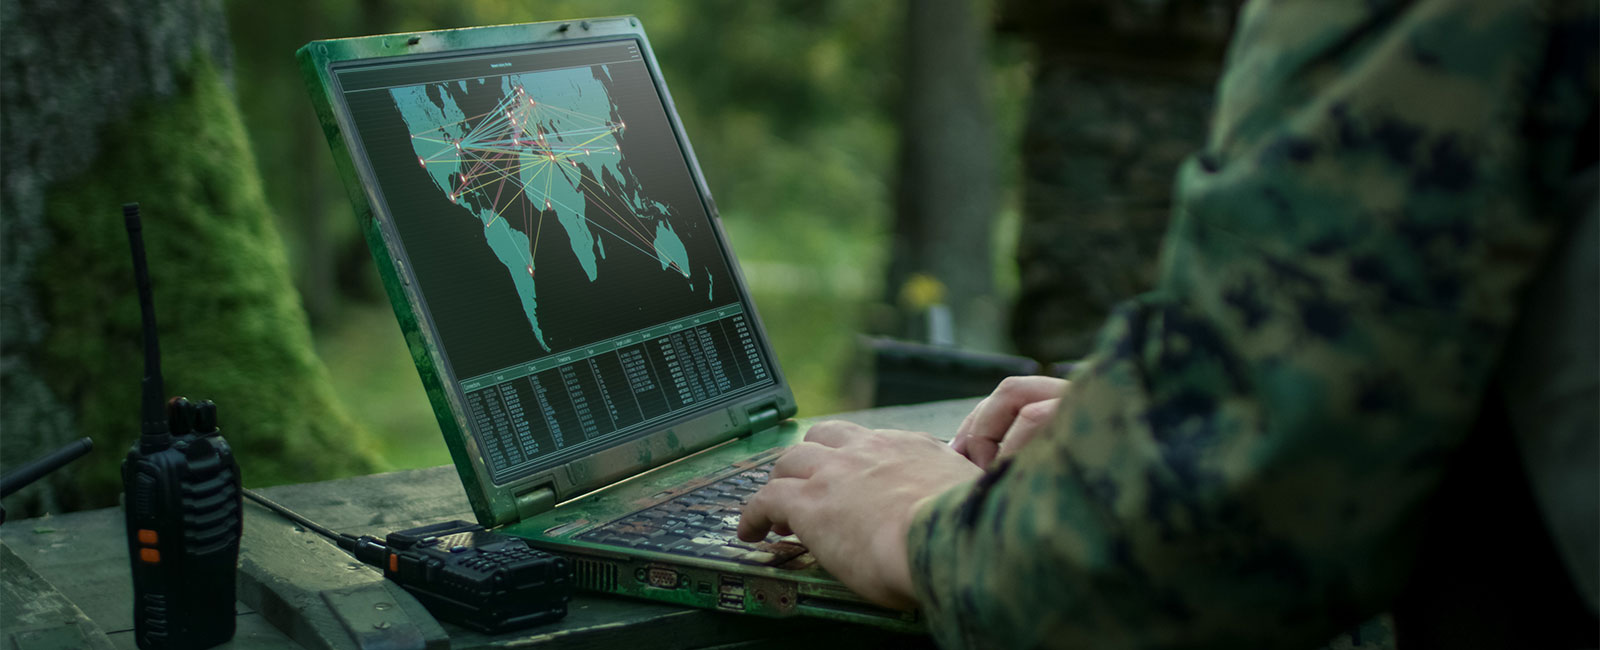 Soldiers using military laptop in forest